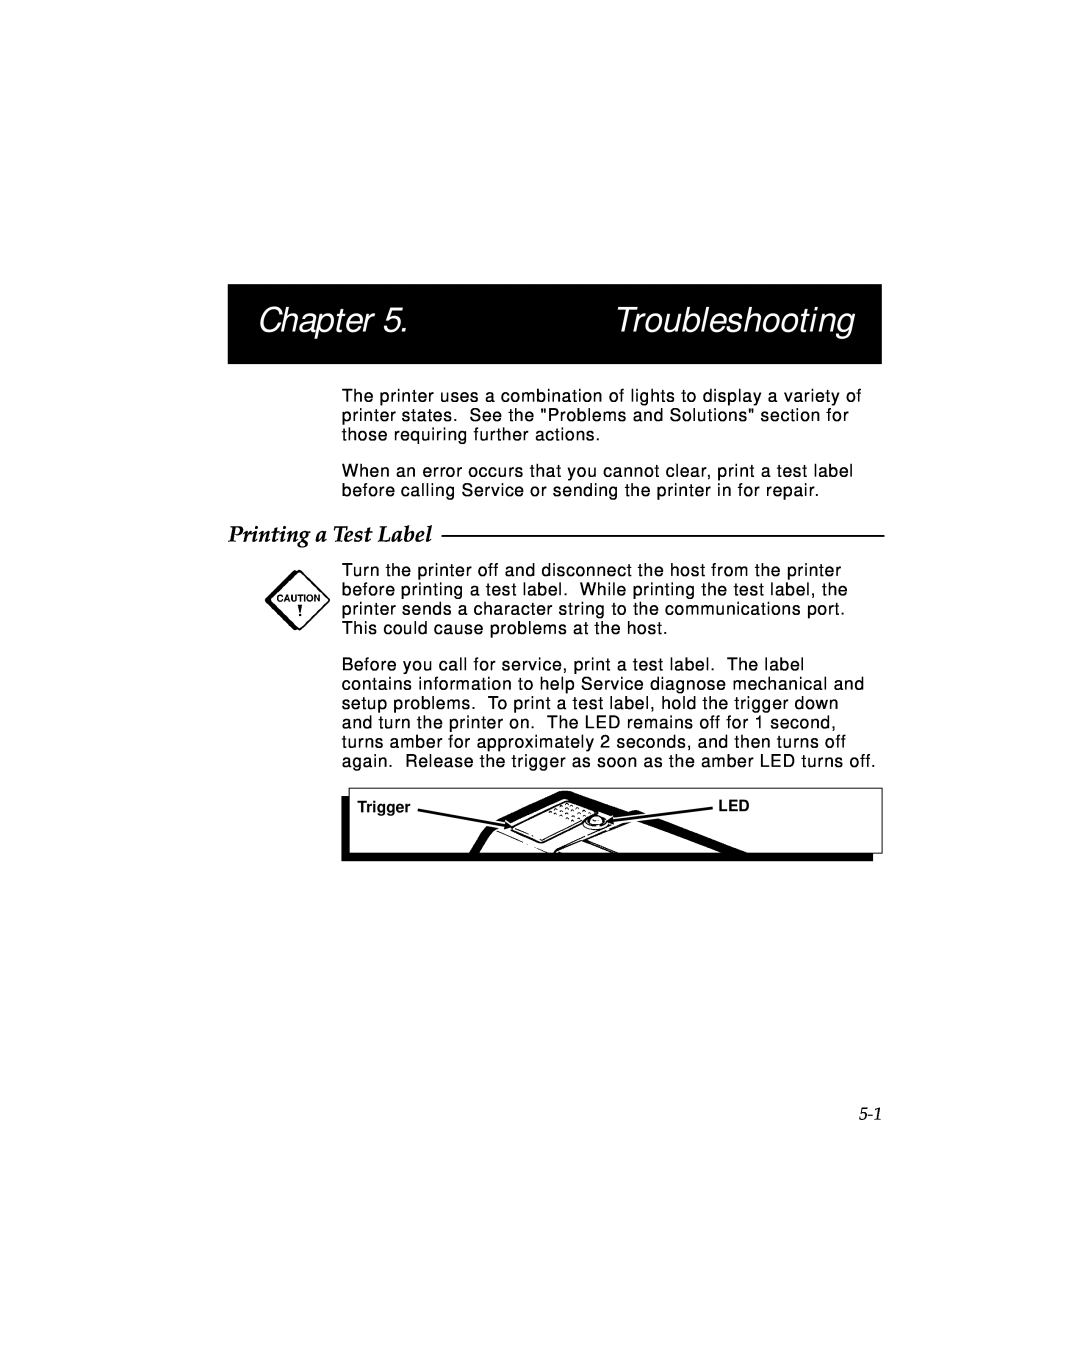 Monarch 9494 manual Troubleshooting, Printing a Test Label, Chapter 